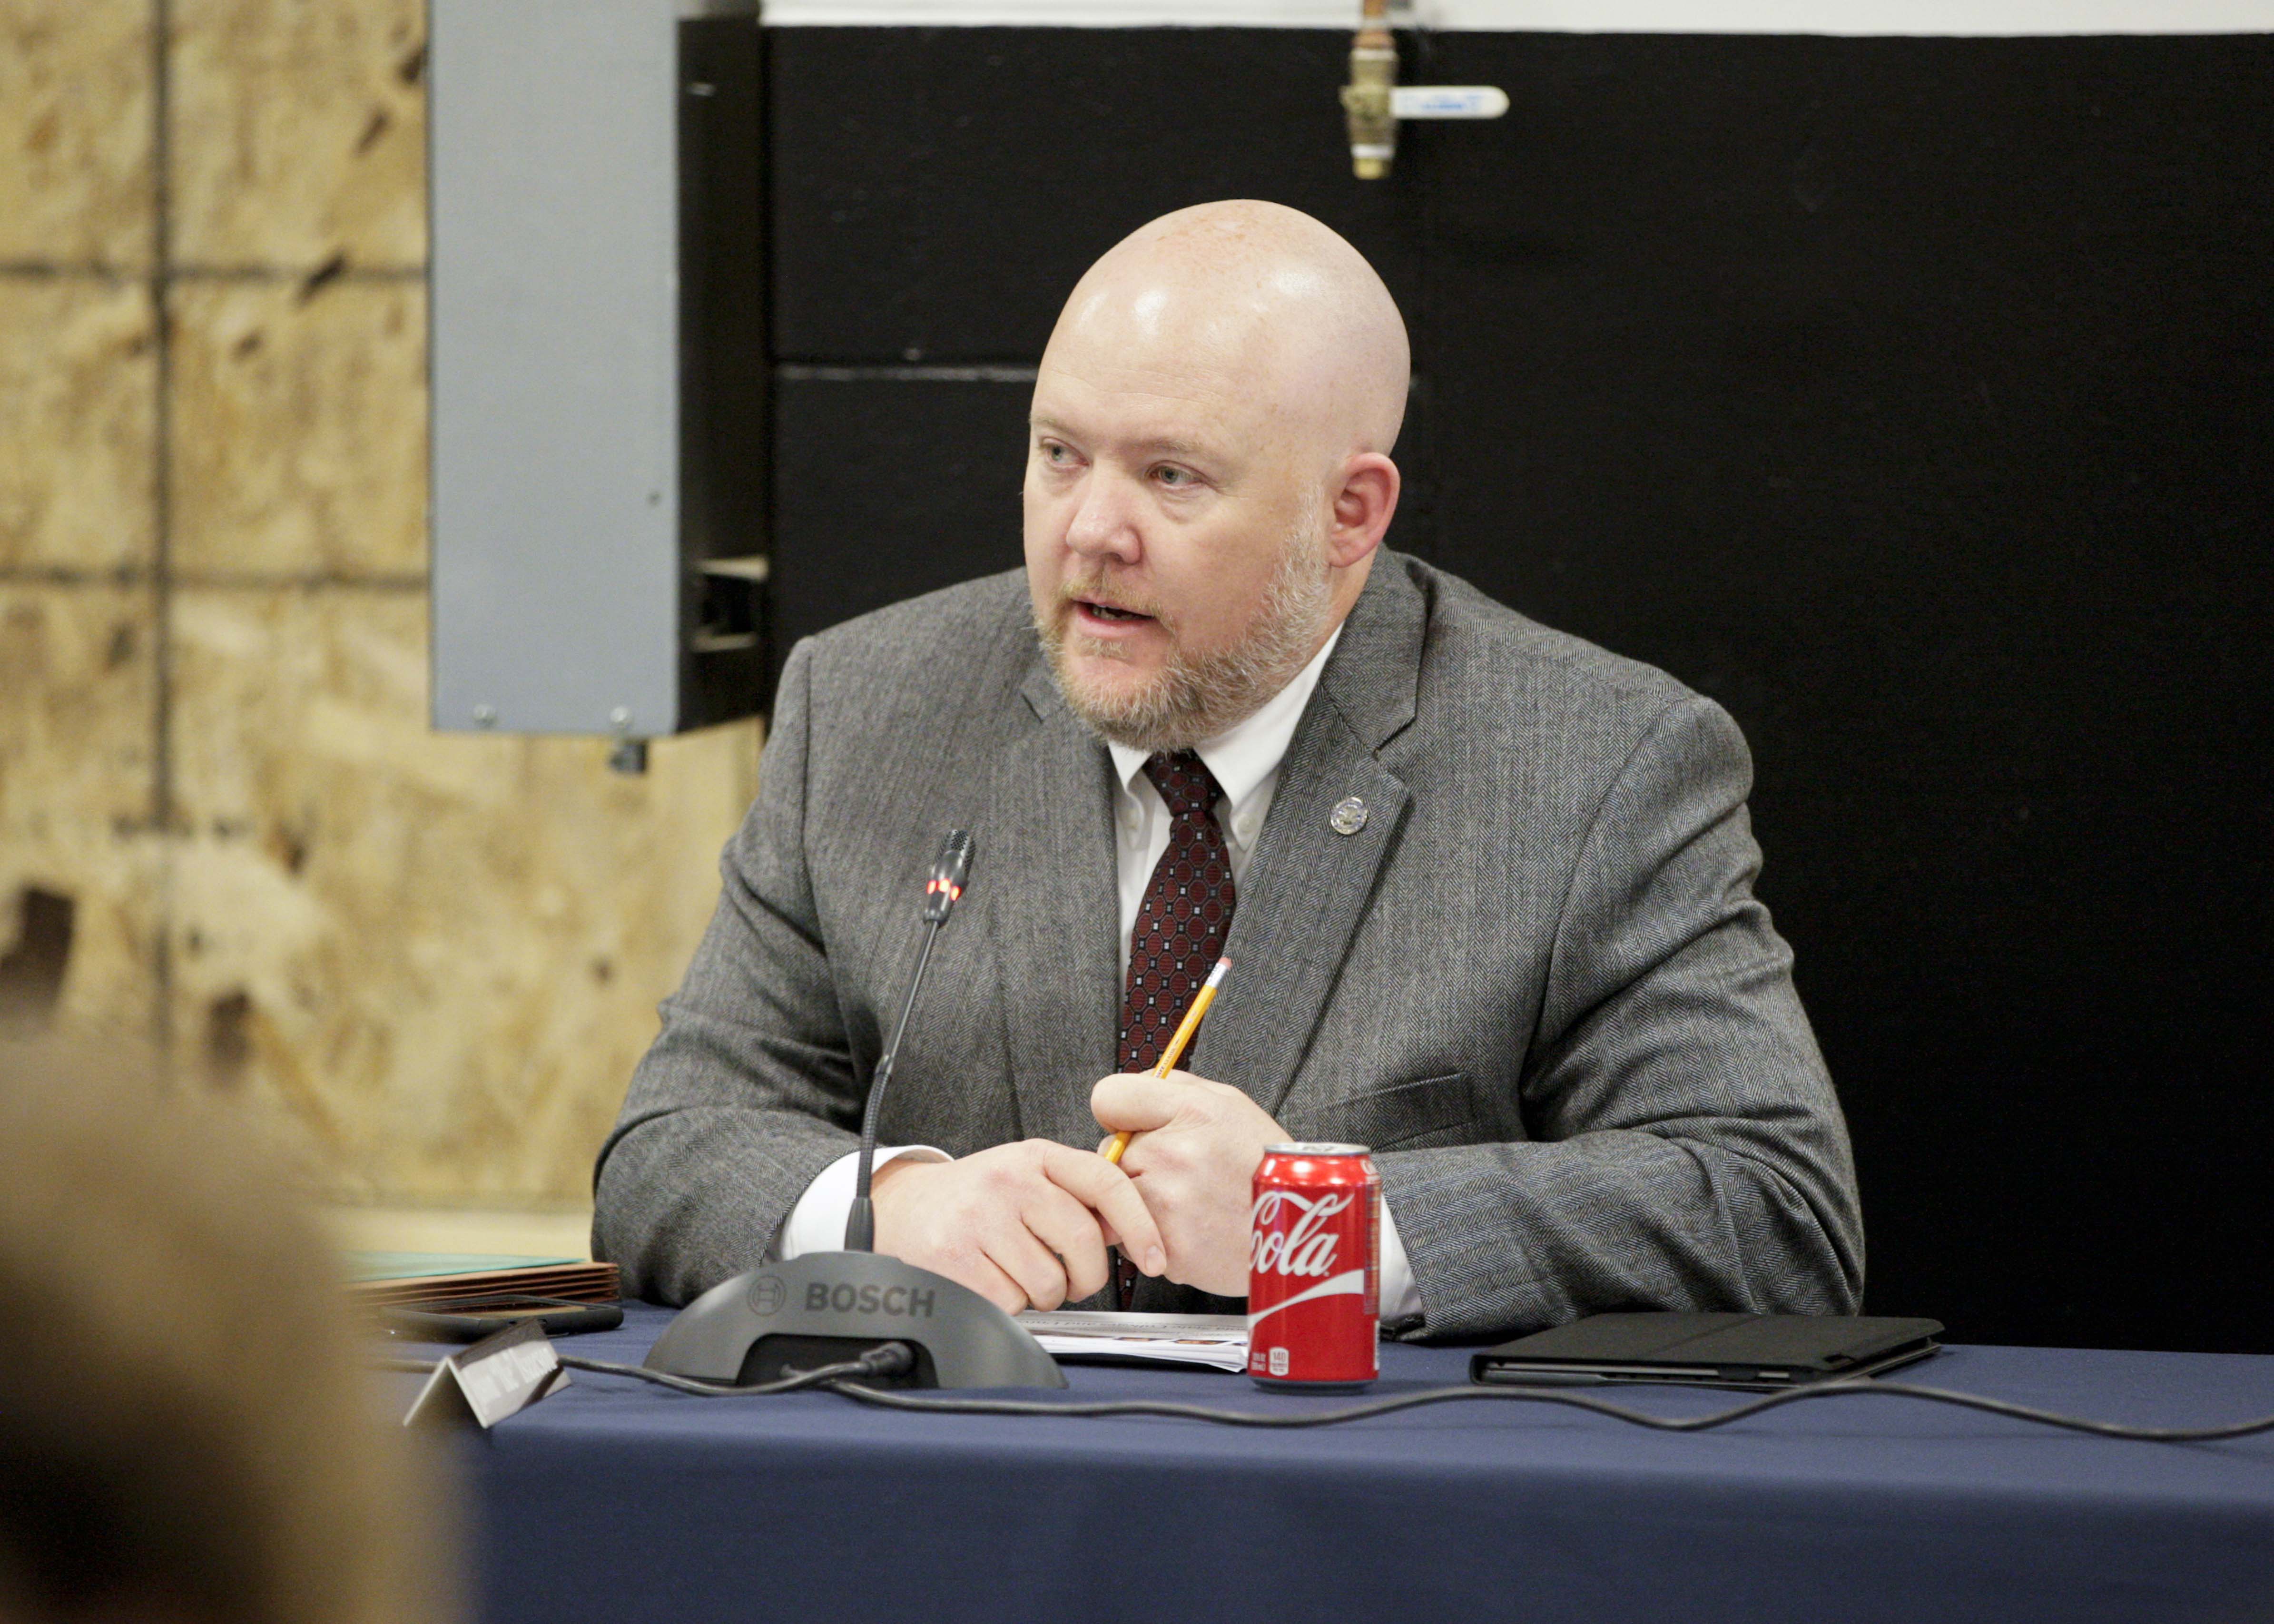 Rep. Jason Isaacson speaks during an overview of the MnSCU system at a hearing of the House Higher Education Policy and Finance Committee on Jan. 21 held at St. Paul College. Photo by Paul Battaglia